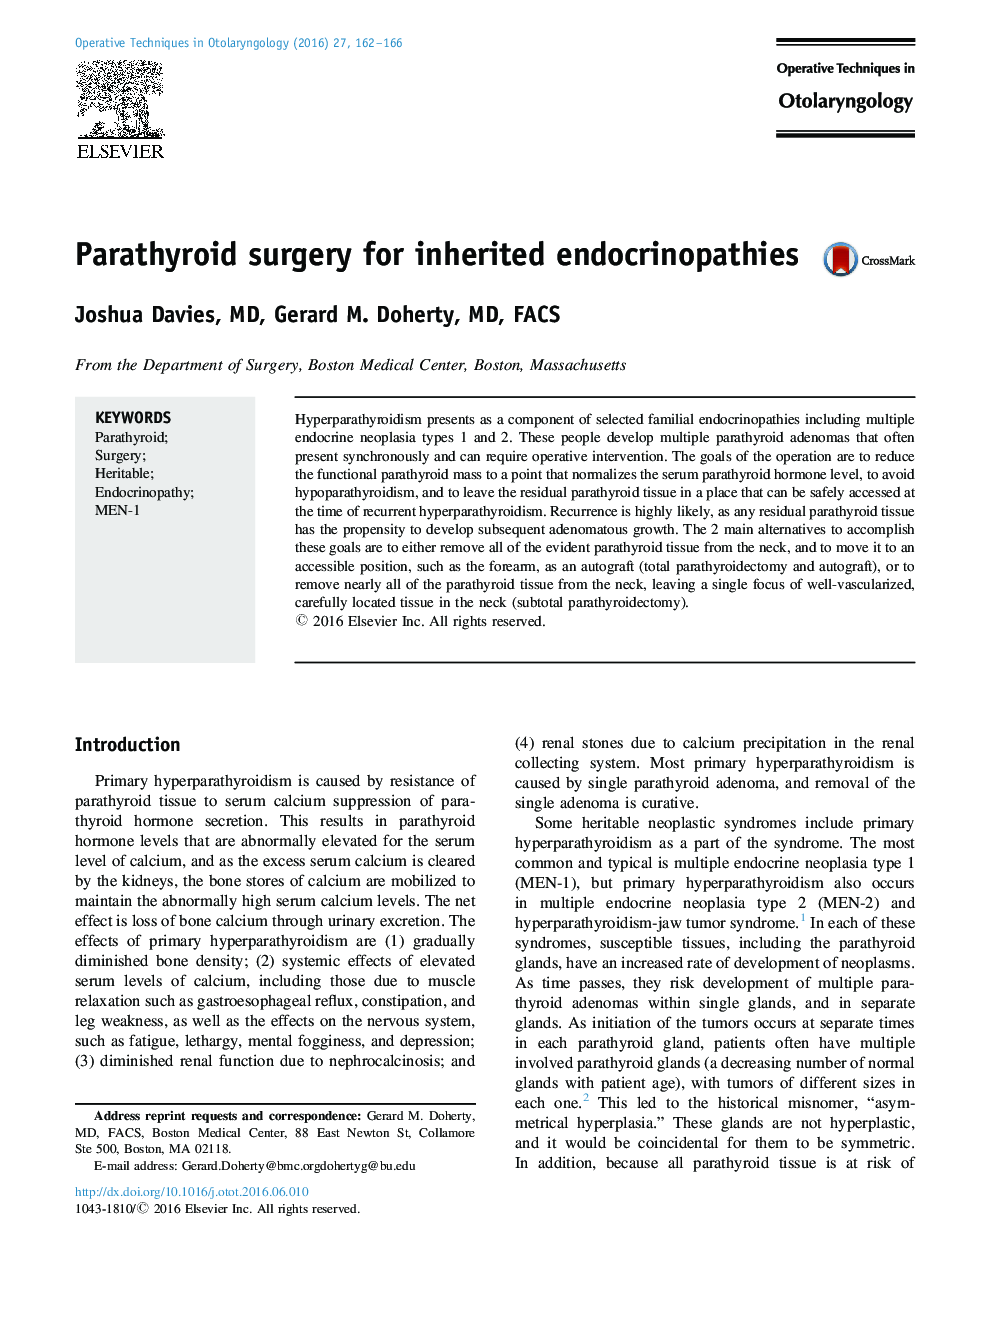 Parathyroid surgery for inherited endocrinopathies